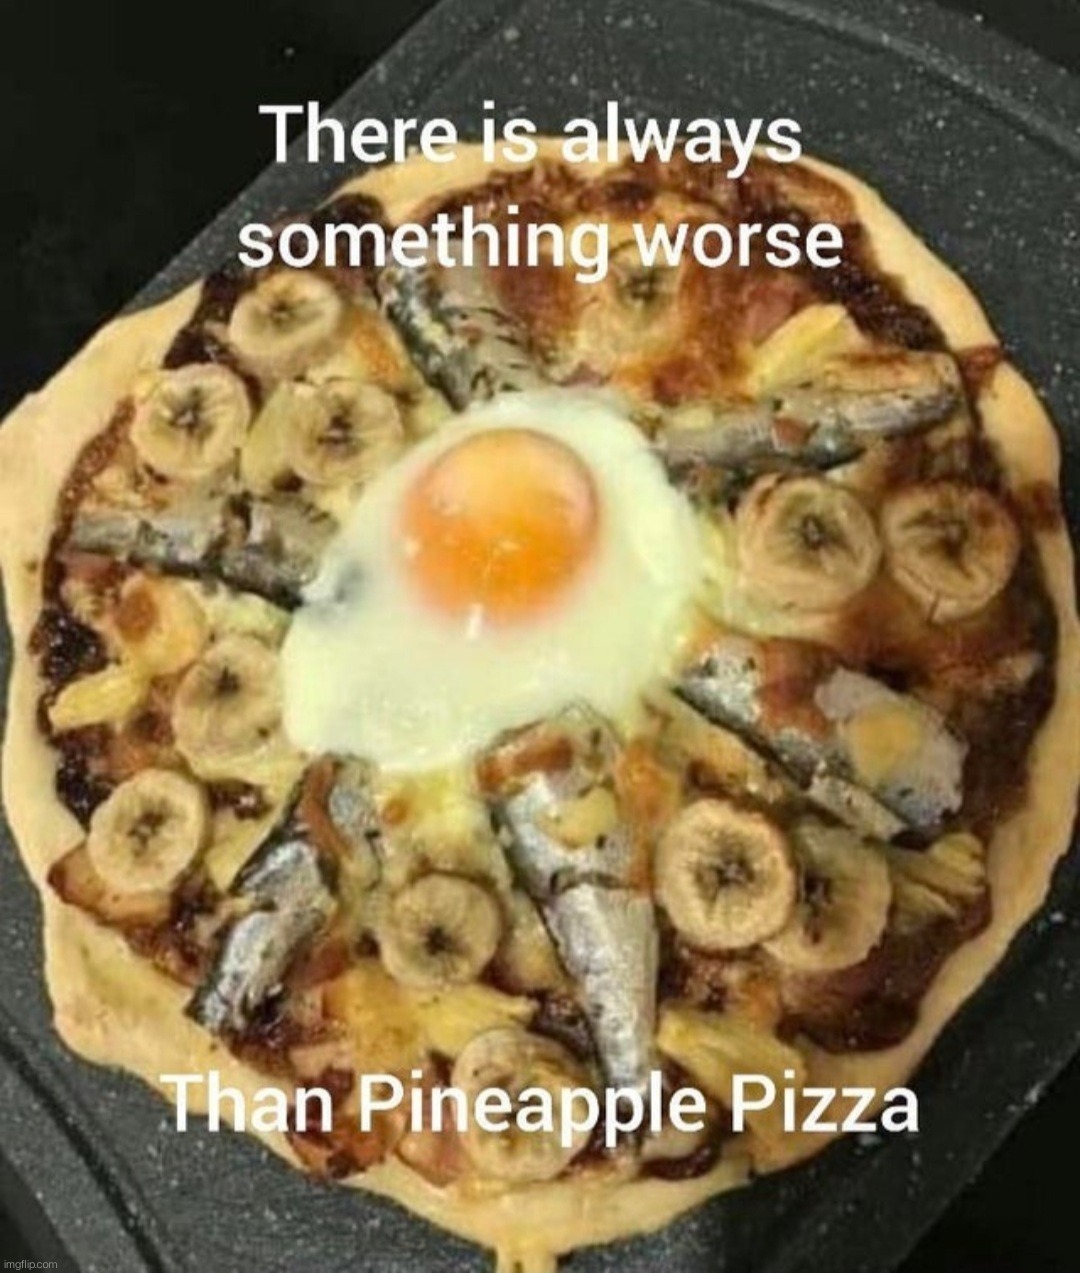 Theres always a bigger fish. . . | image tagged in cursed image,cursed,pineapple pizza,it could be worse,memes | made w/ Imgflip meme maker